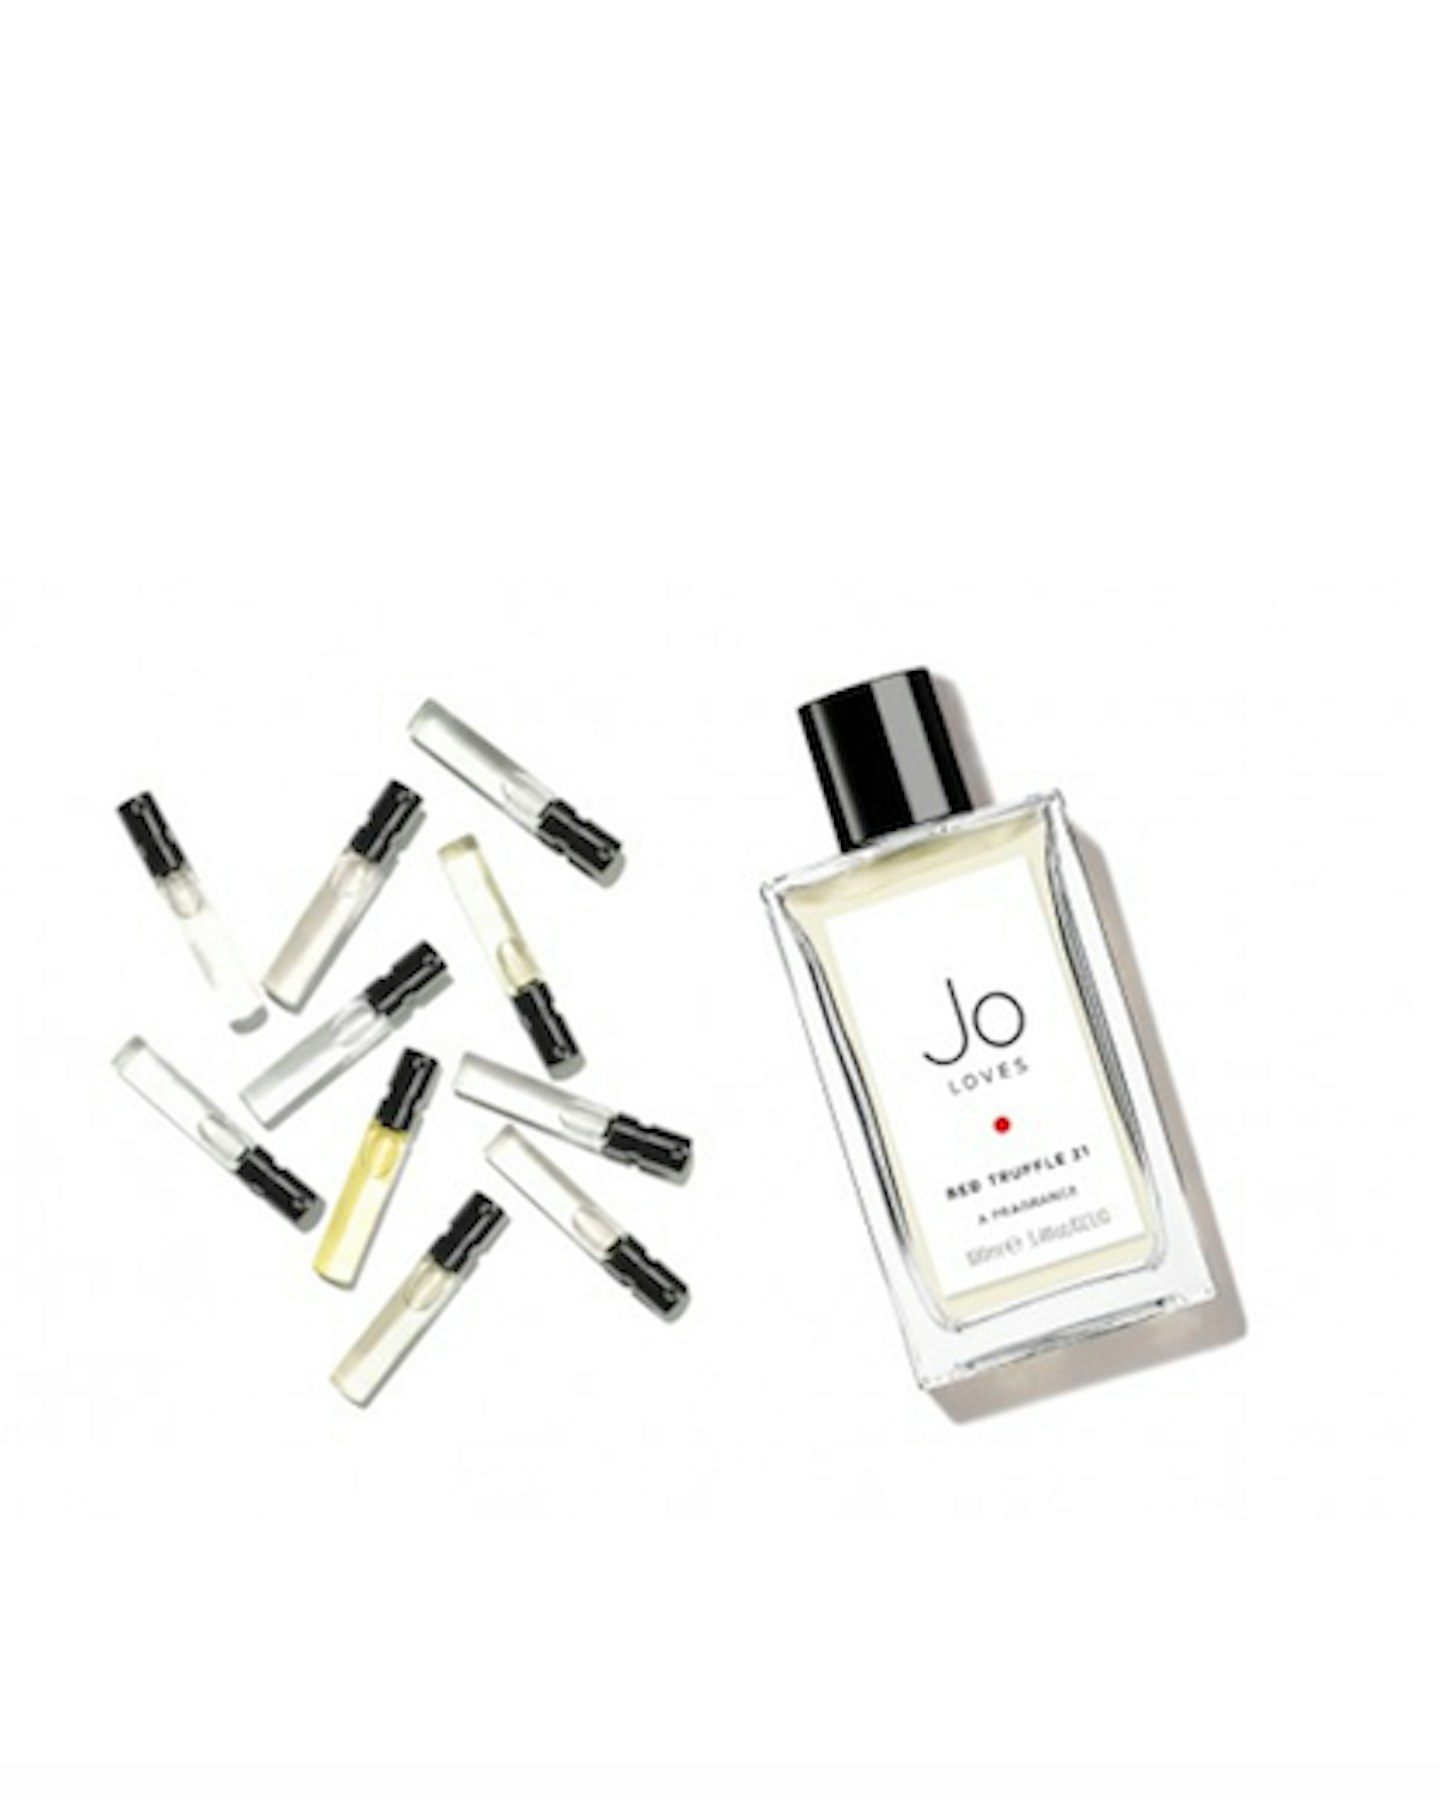 [Jo Loves, The Fragrance Discovery Gift Experience, £140; joloves.com](https://www.joloves.com/gifts/fragrance-discovery-gift-experience-100ml.html)